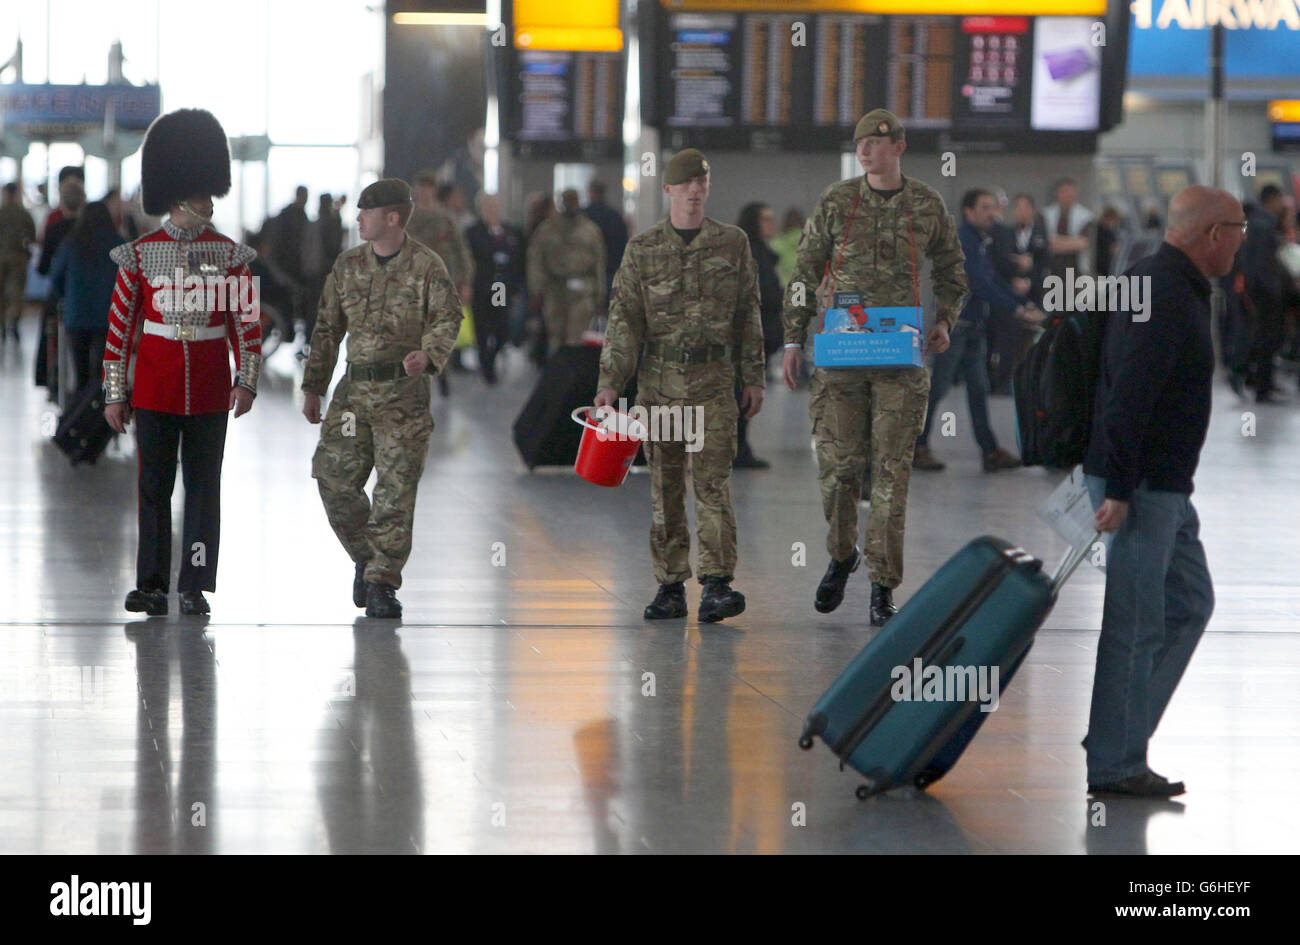 Soldiers selling poppies in terminal 5 at Heathrow airport in London on Royal British Legion's (RBL) London Poppy Day. Stock Photo